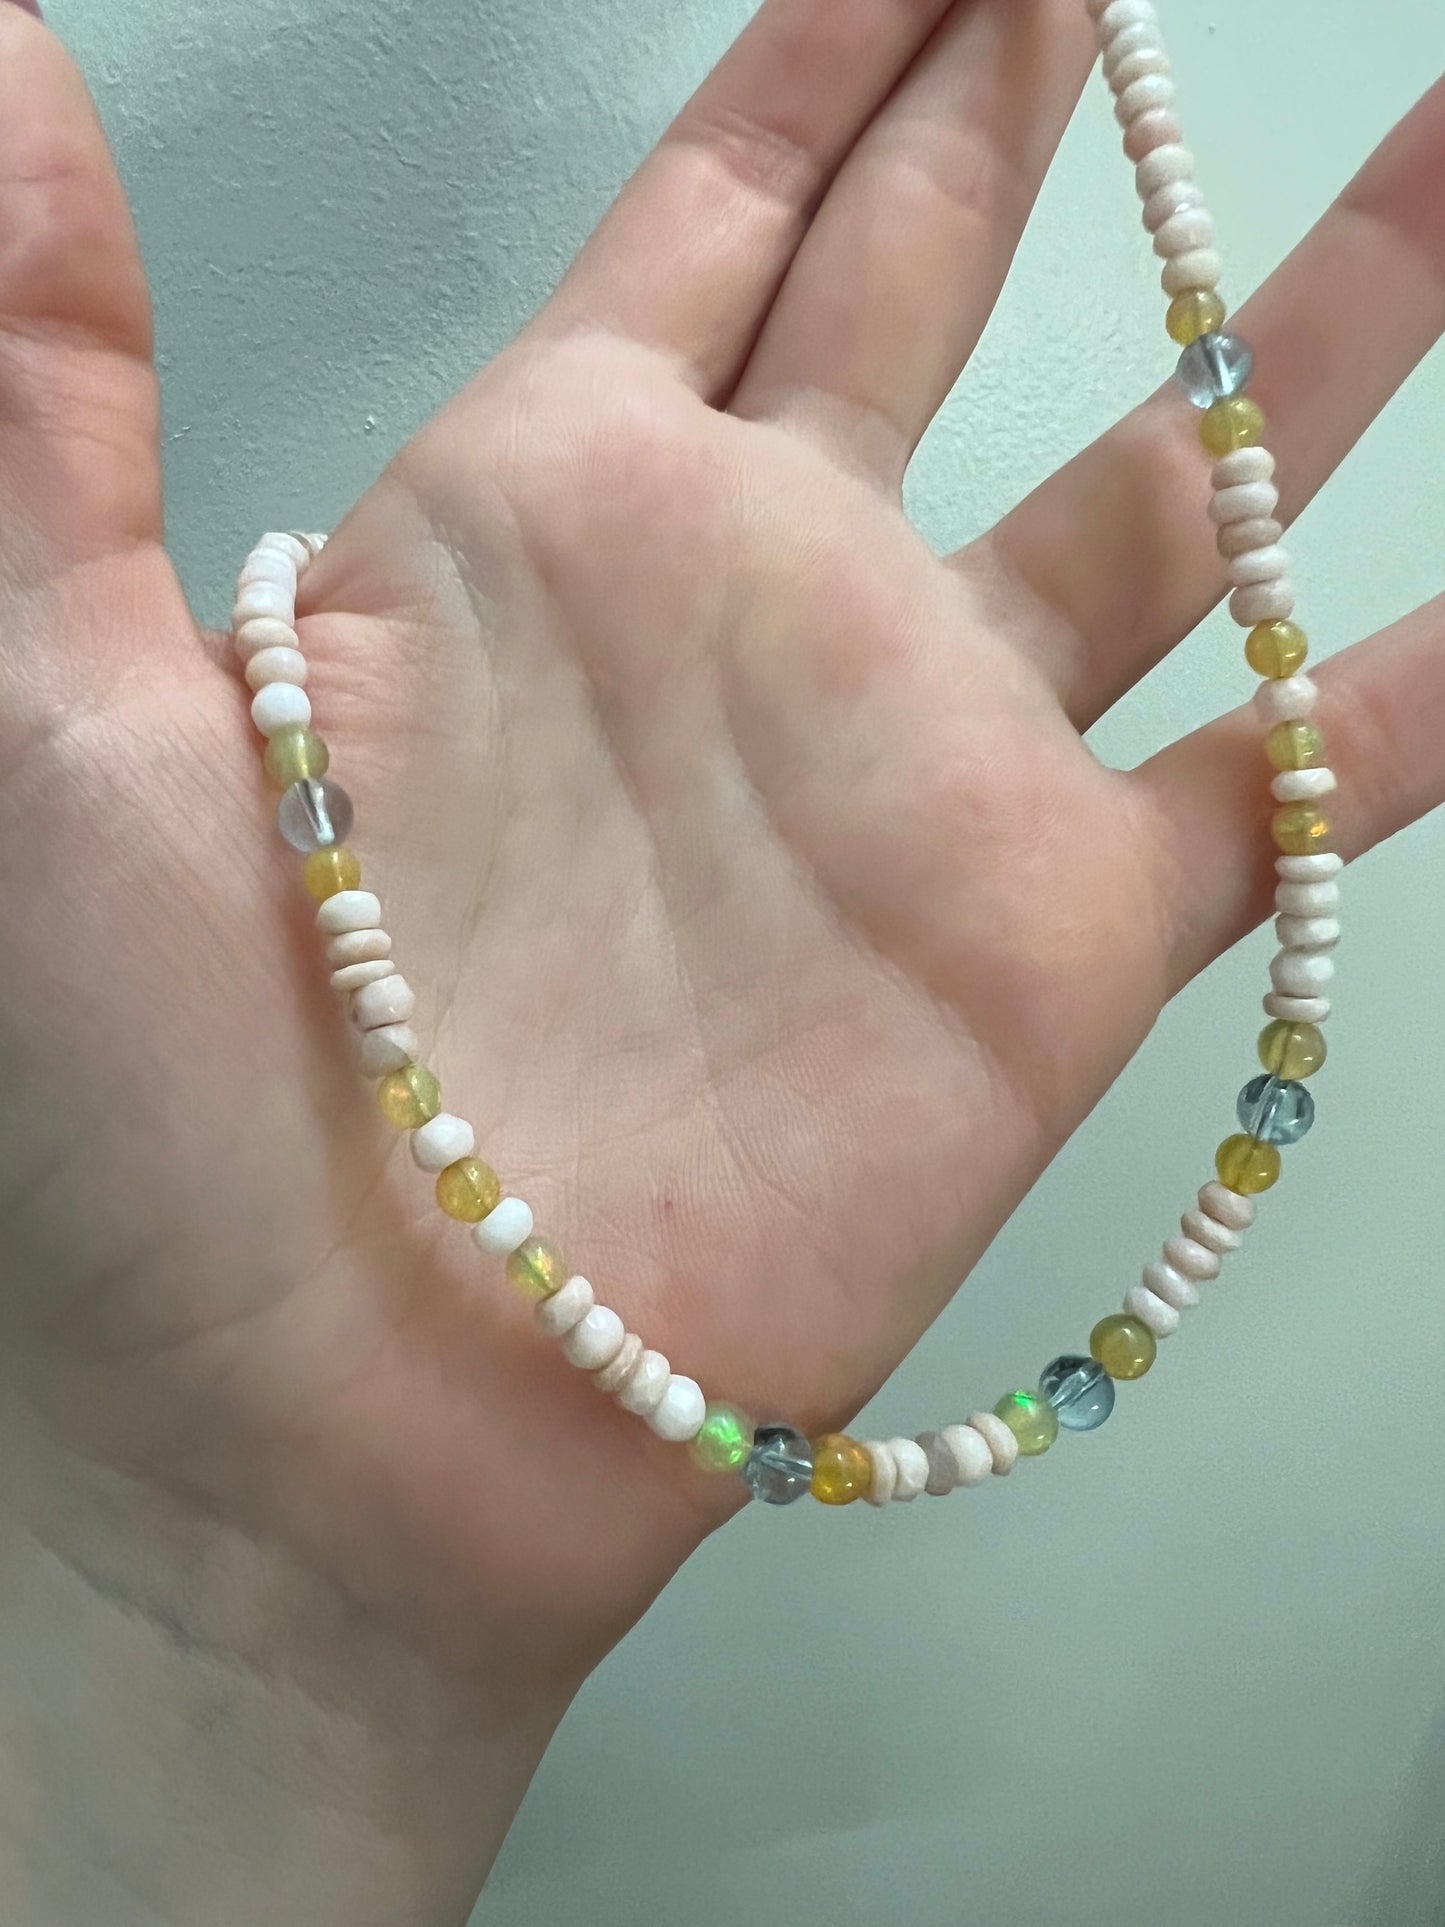 Pink Opal, Opal, and Aquamarine Necklace